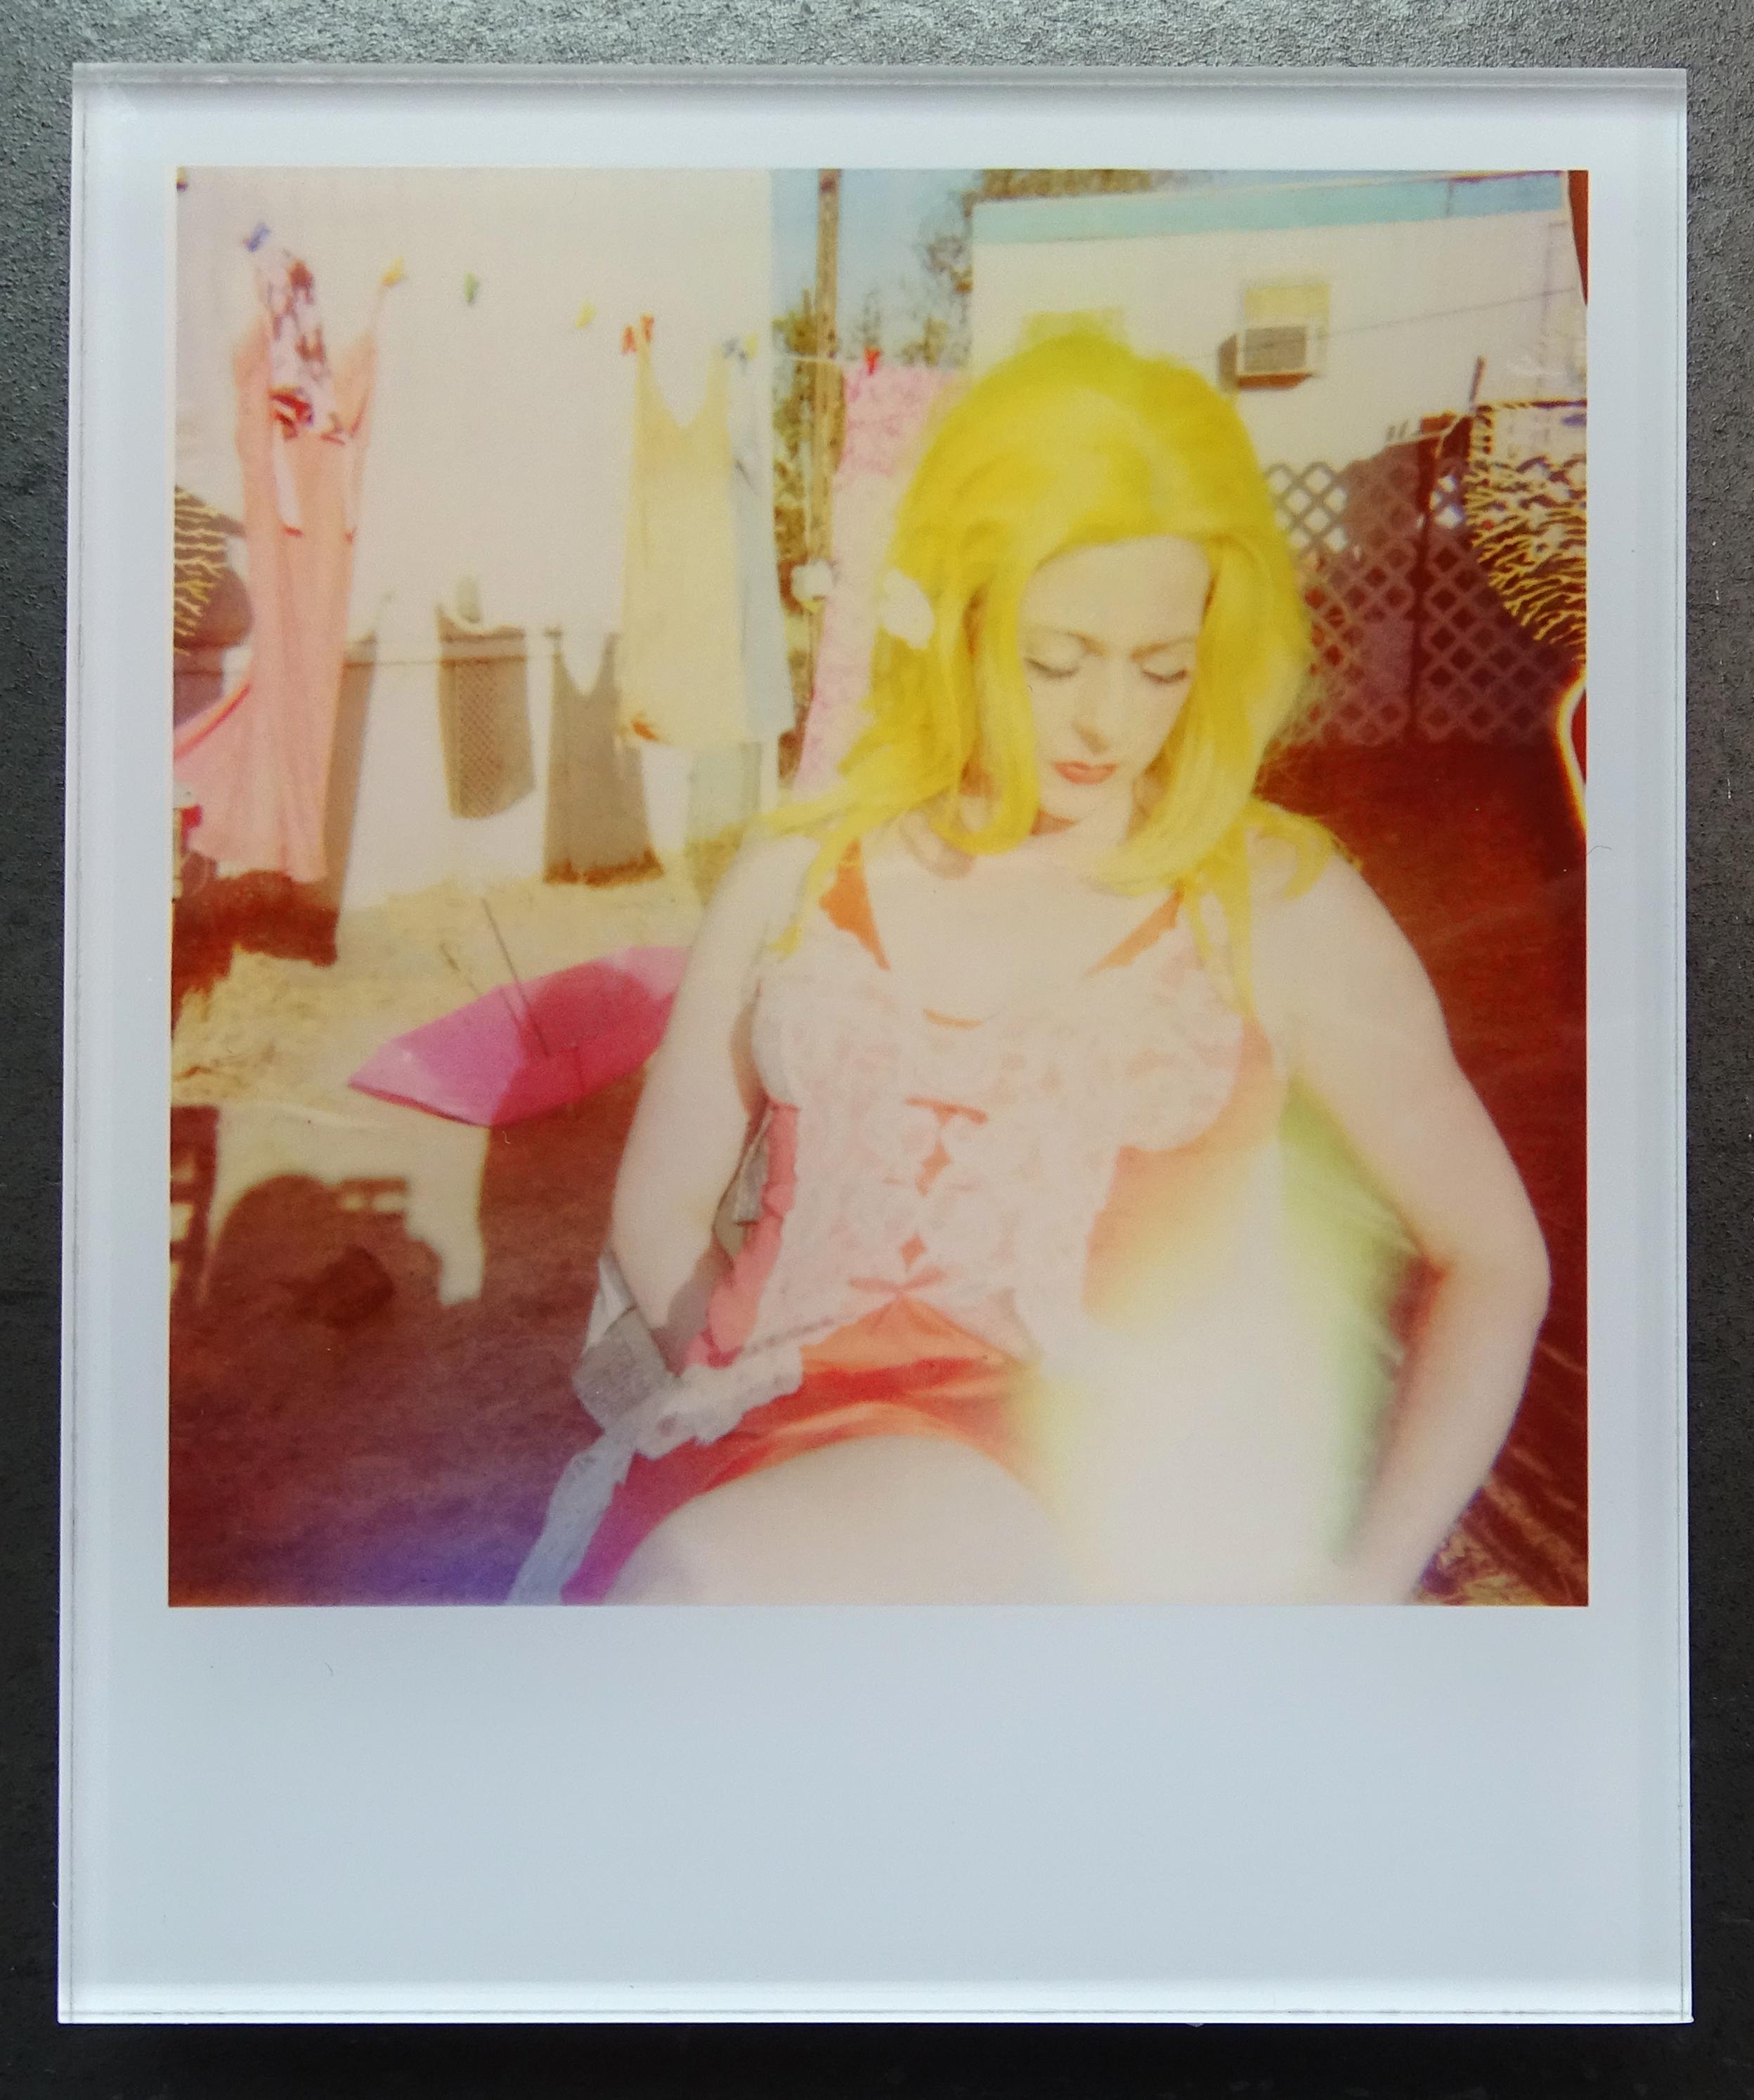 Stefanie Schneider's Minis
Available (Oxana's 30th Birthday), 2008

Signed and signature brand on verso.
Lambda digital Color Photographs based on the Polaroid.
Sandwiched in between Plexiglass (thickness 0.7cm)

Polaroid sized open Editions